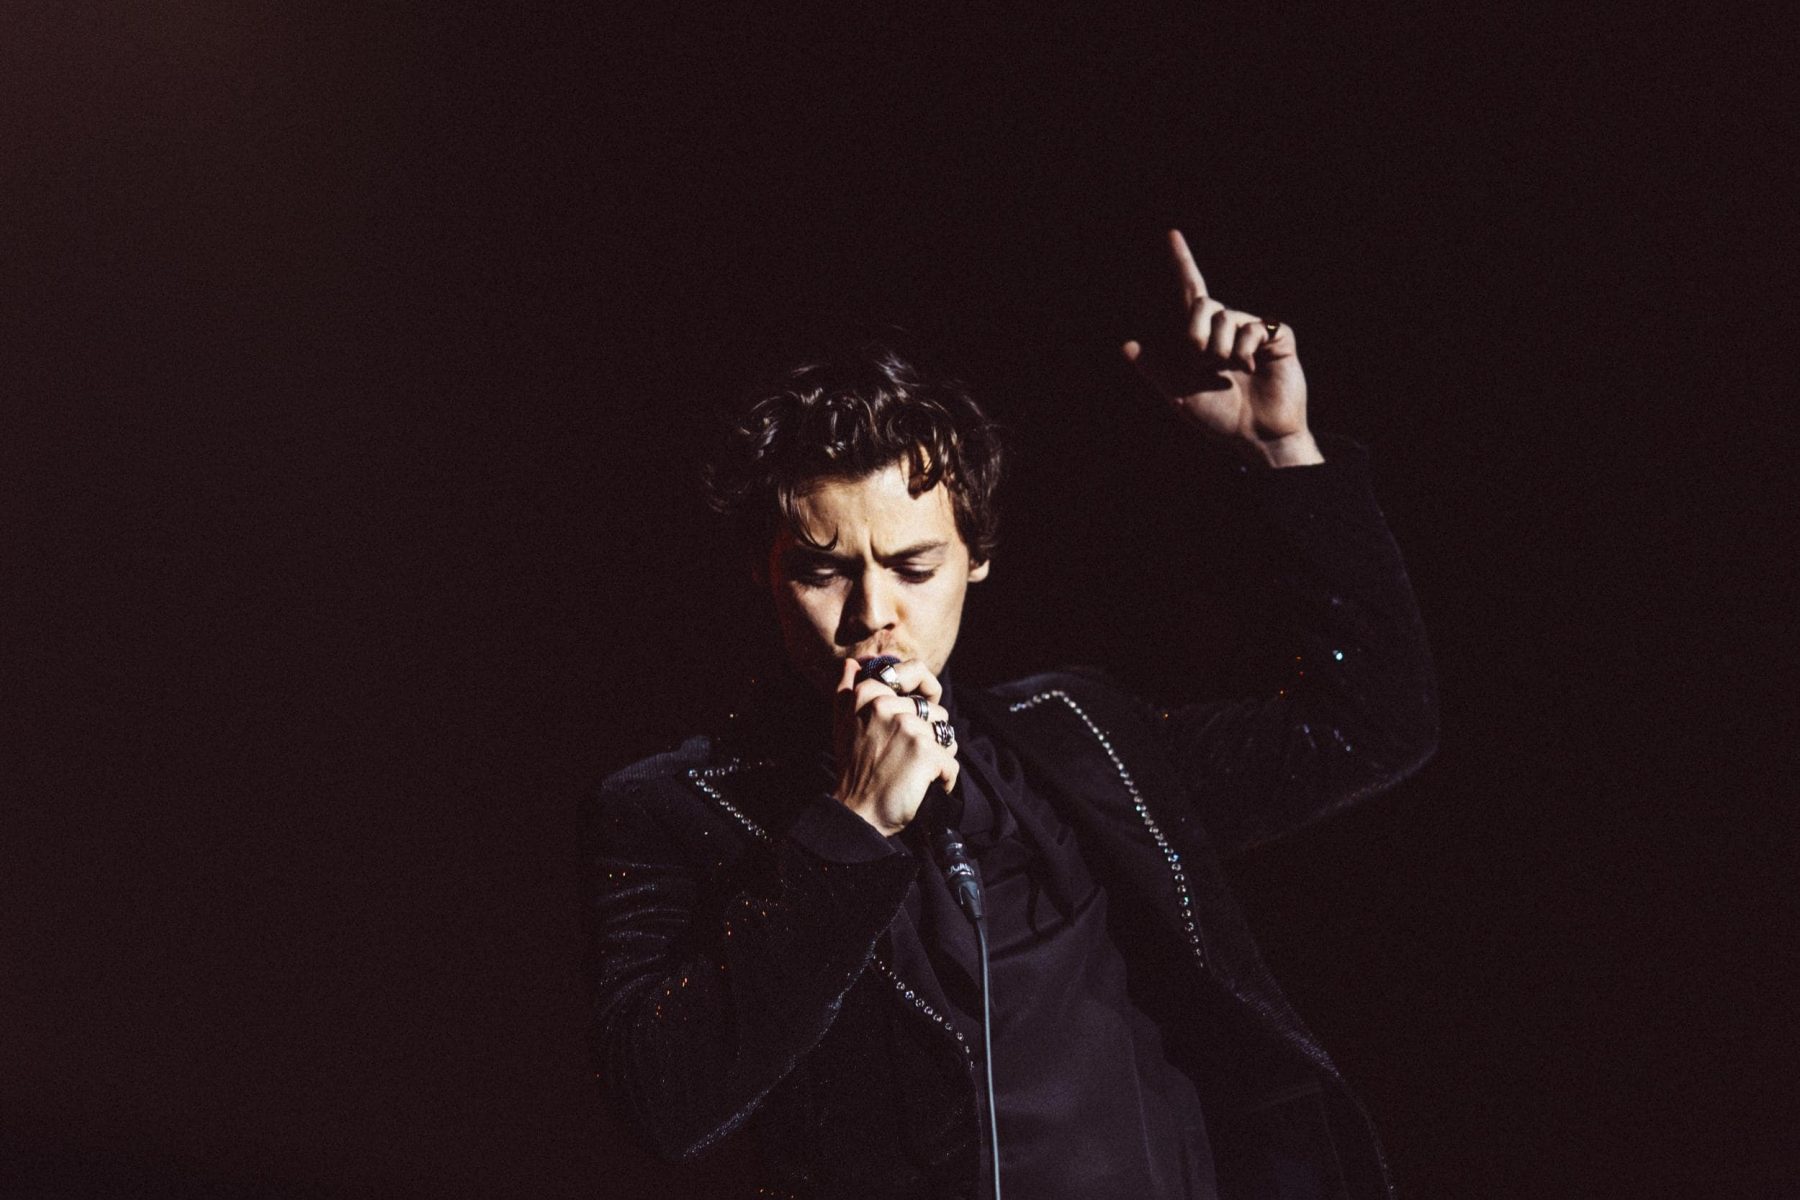 Harry Styles Background - Performance - HD Wallpaper 